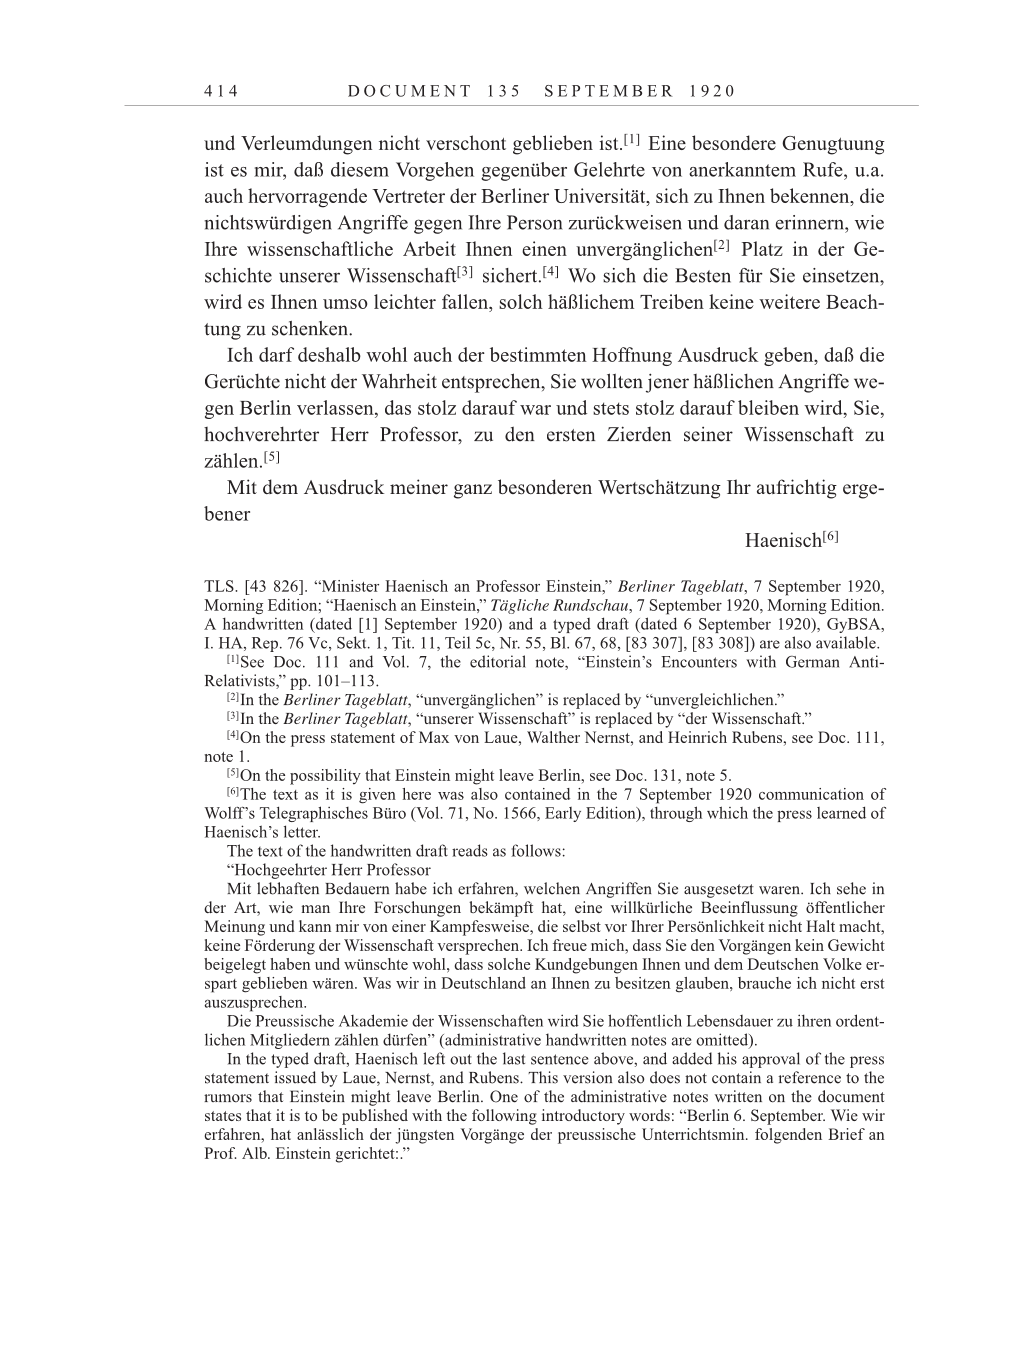 Volume 10: The Berlin Years: Correspondence May-December 1920 / Supplementary Correspondence 1909-1920 page 414